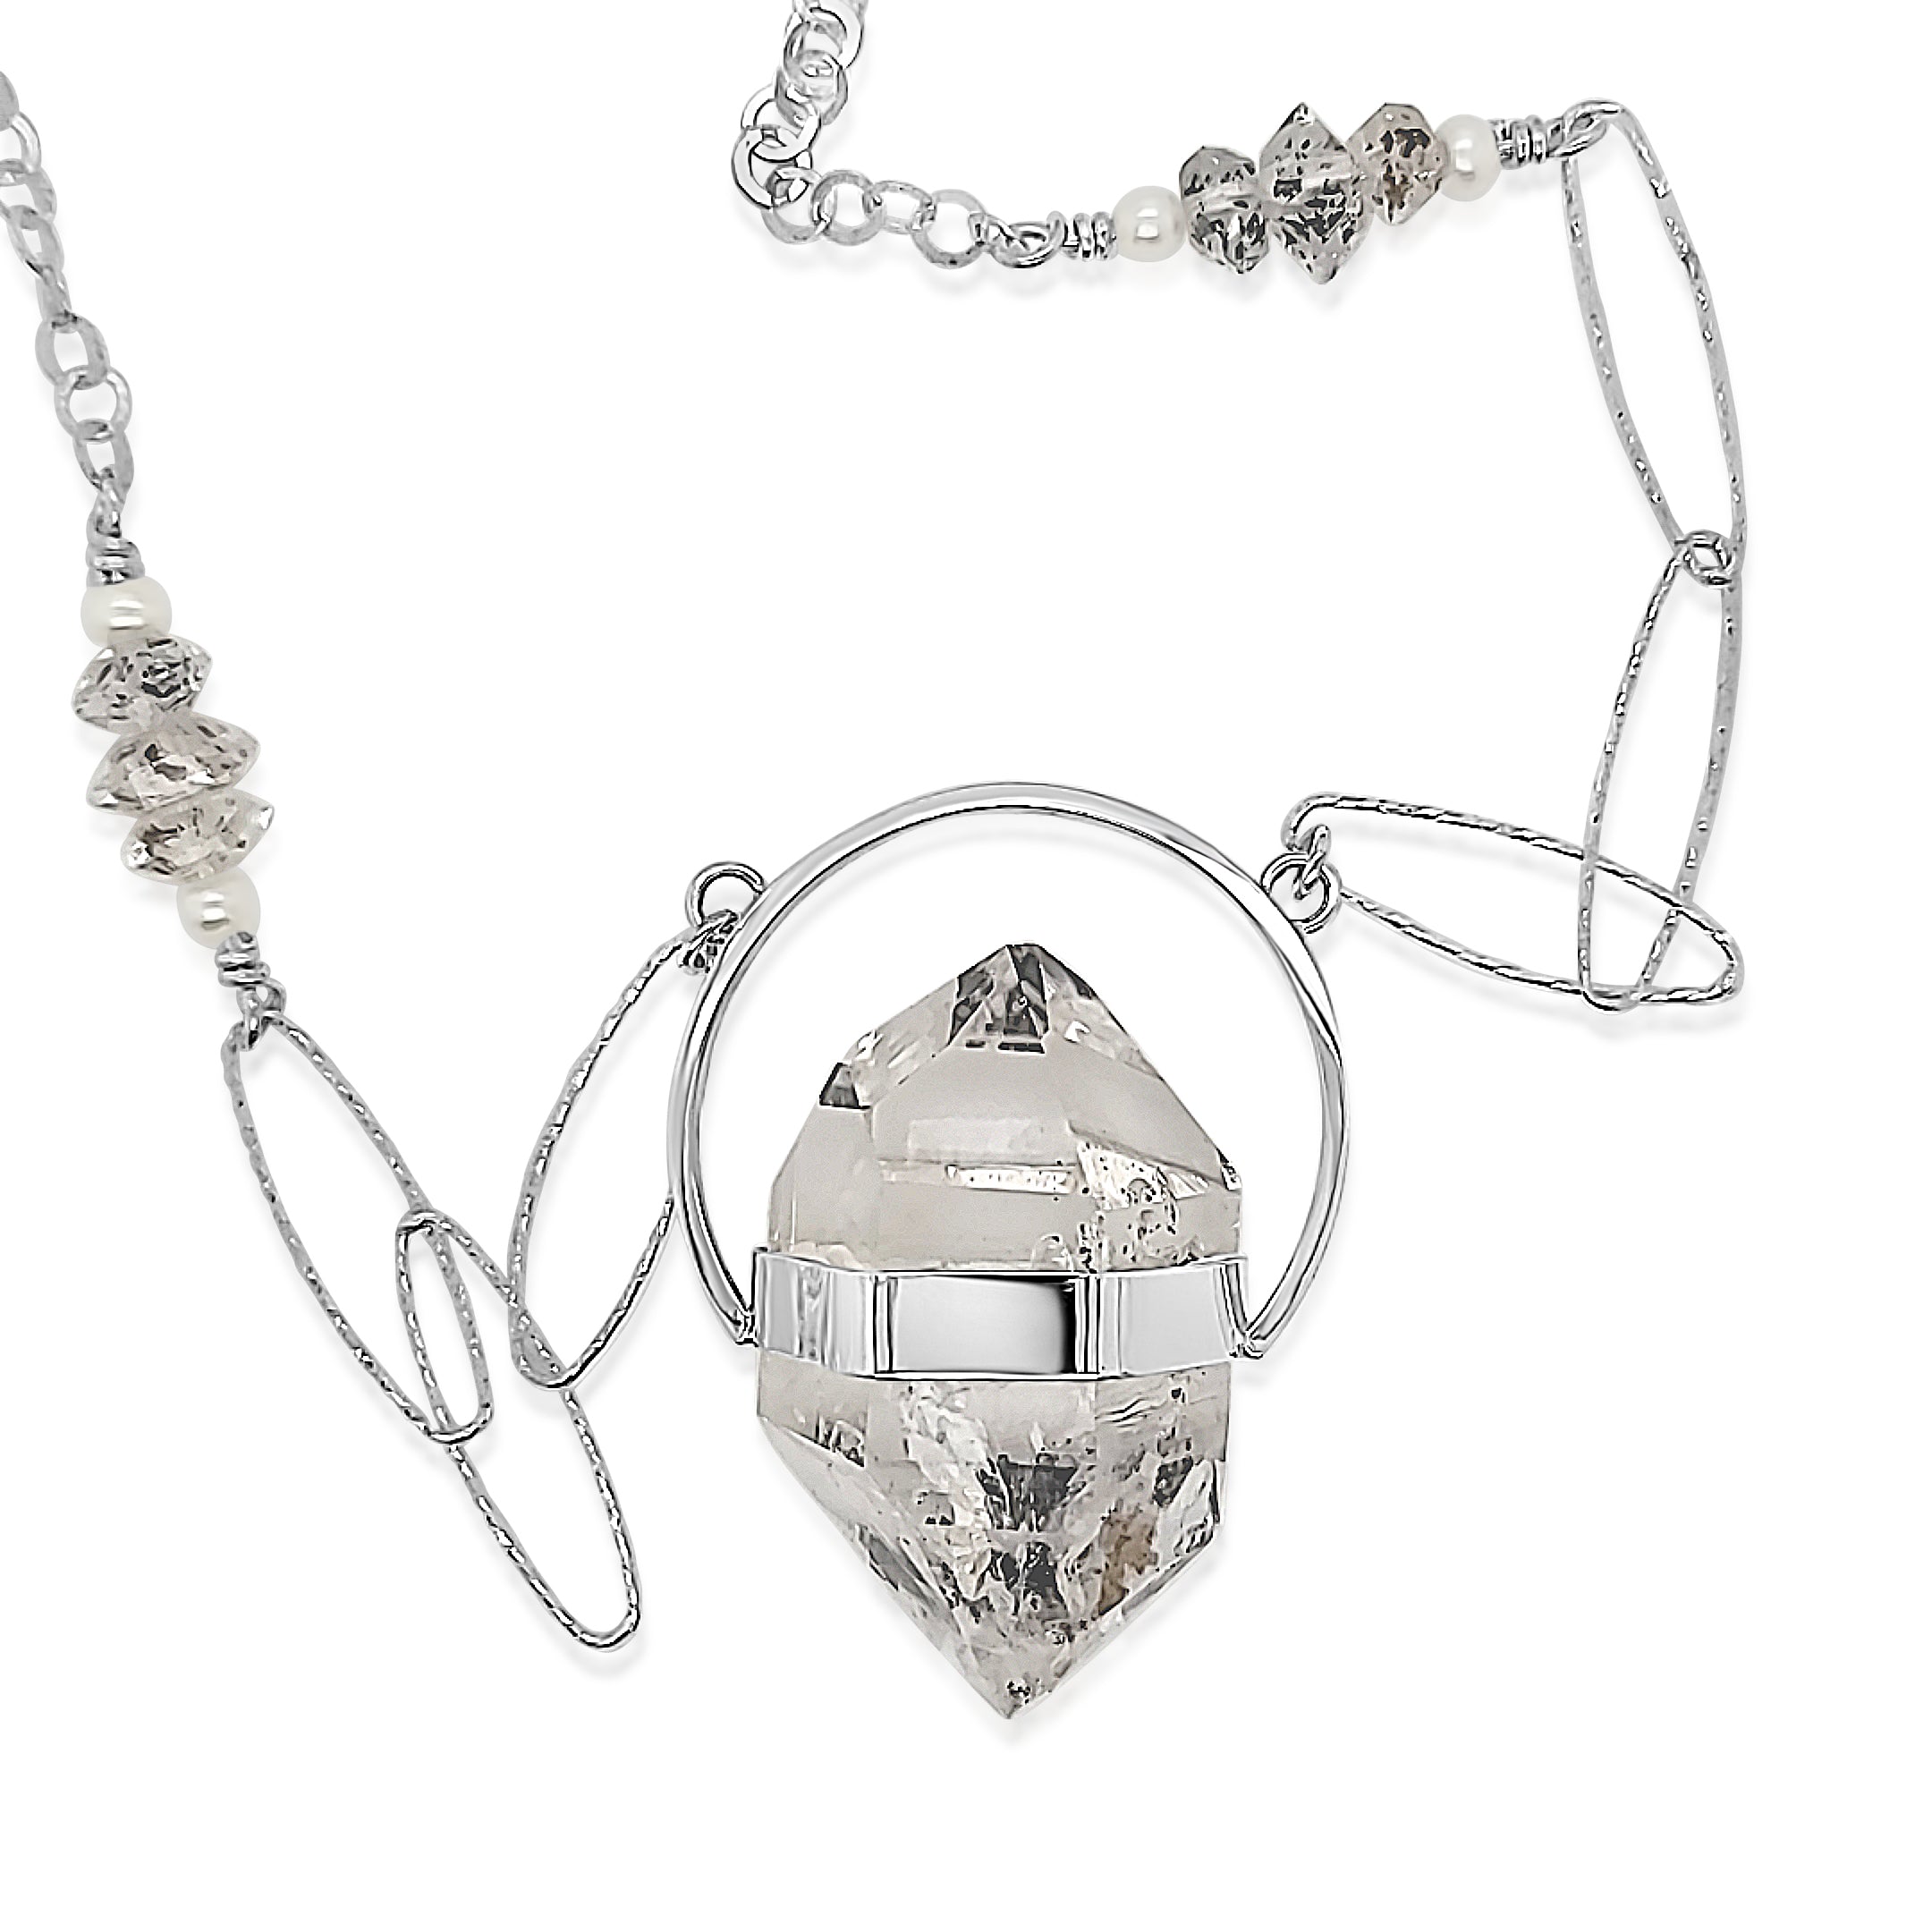 Herkimer Quartz necklace with Freshwater Pearls and set in Sterling Silver.